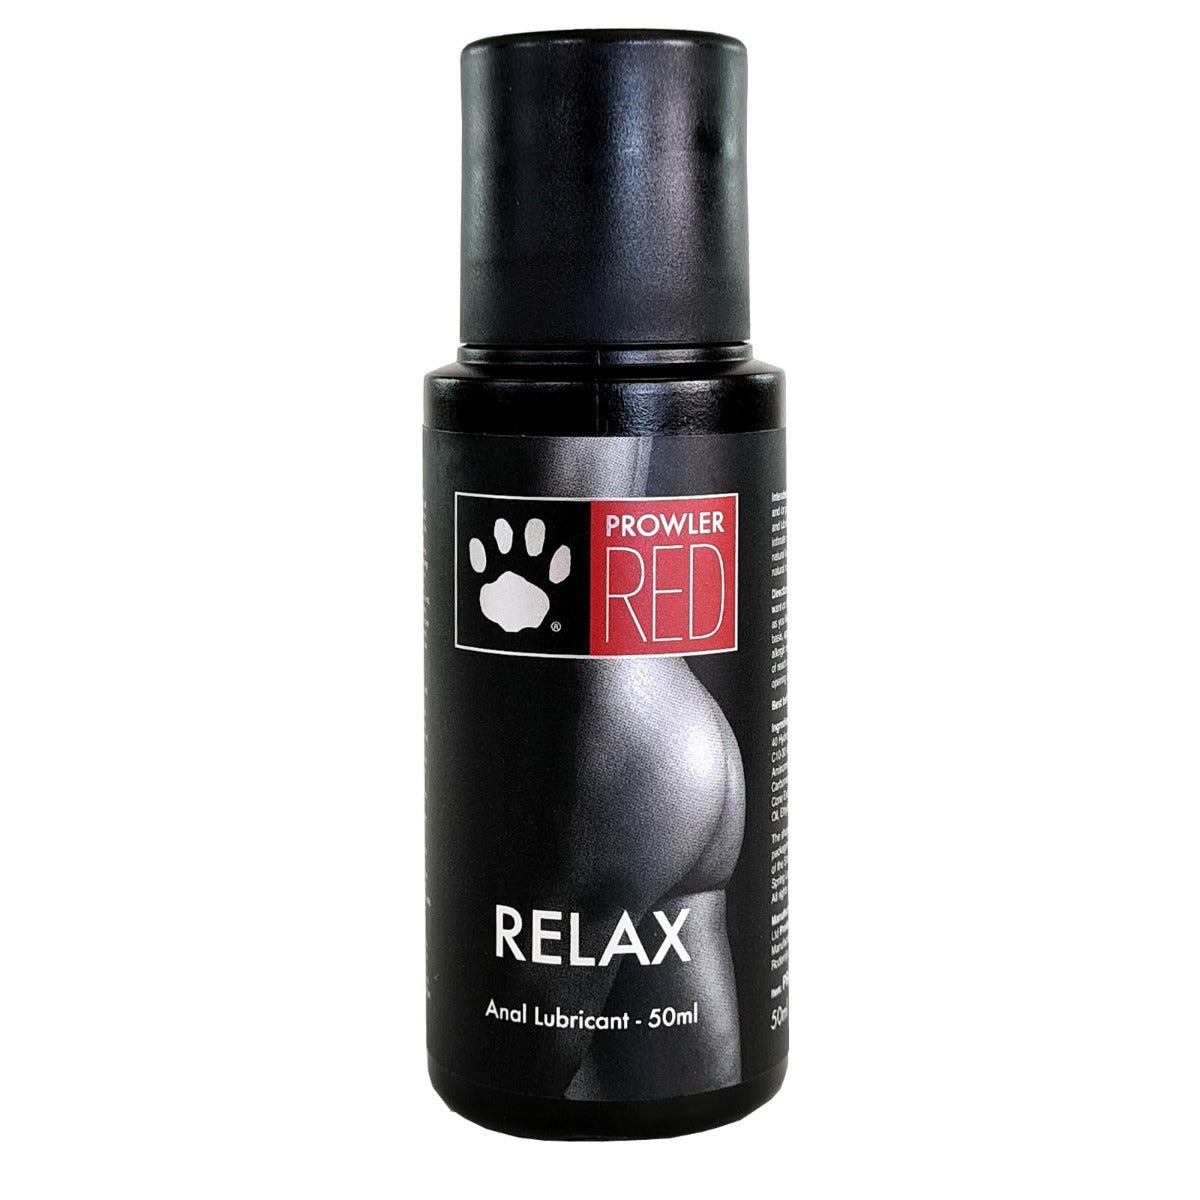 Prowler RED Relax Anal Lube (7021158301860)